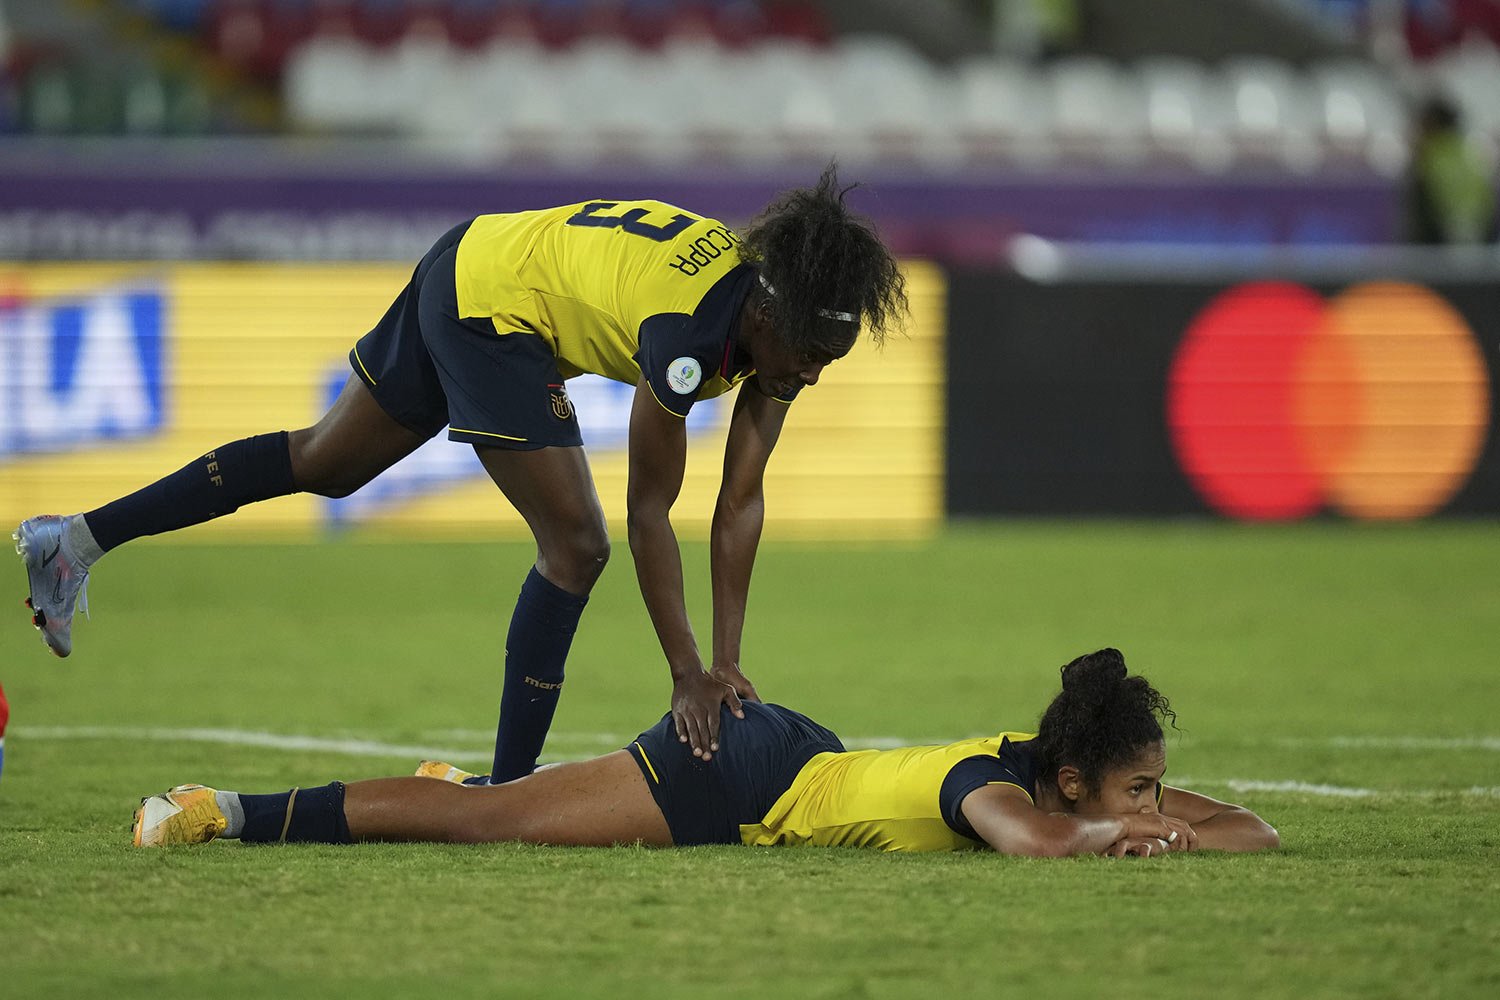  Ecuador's Ariana Lomas, top, comforts her teammate Nayely Bolaños after missing a chance to score against Chile during a Women's Copa America soccer match in Cali, Colombia, Thursday, July 14, 2022. (AP Photo/Dolores Ochoa) 